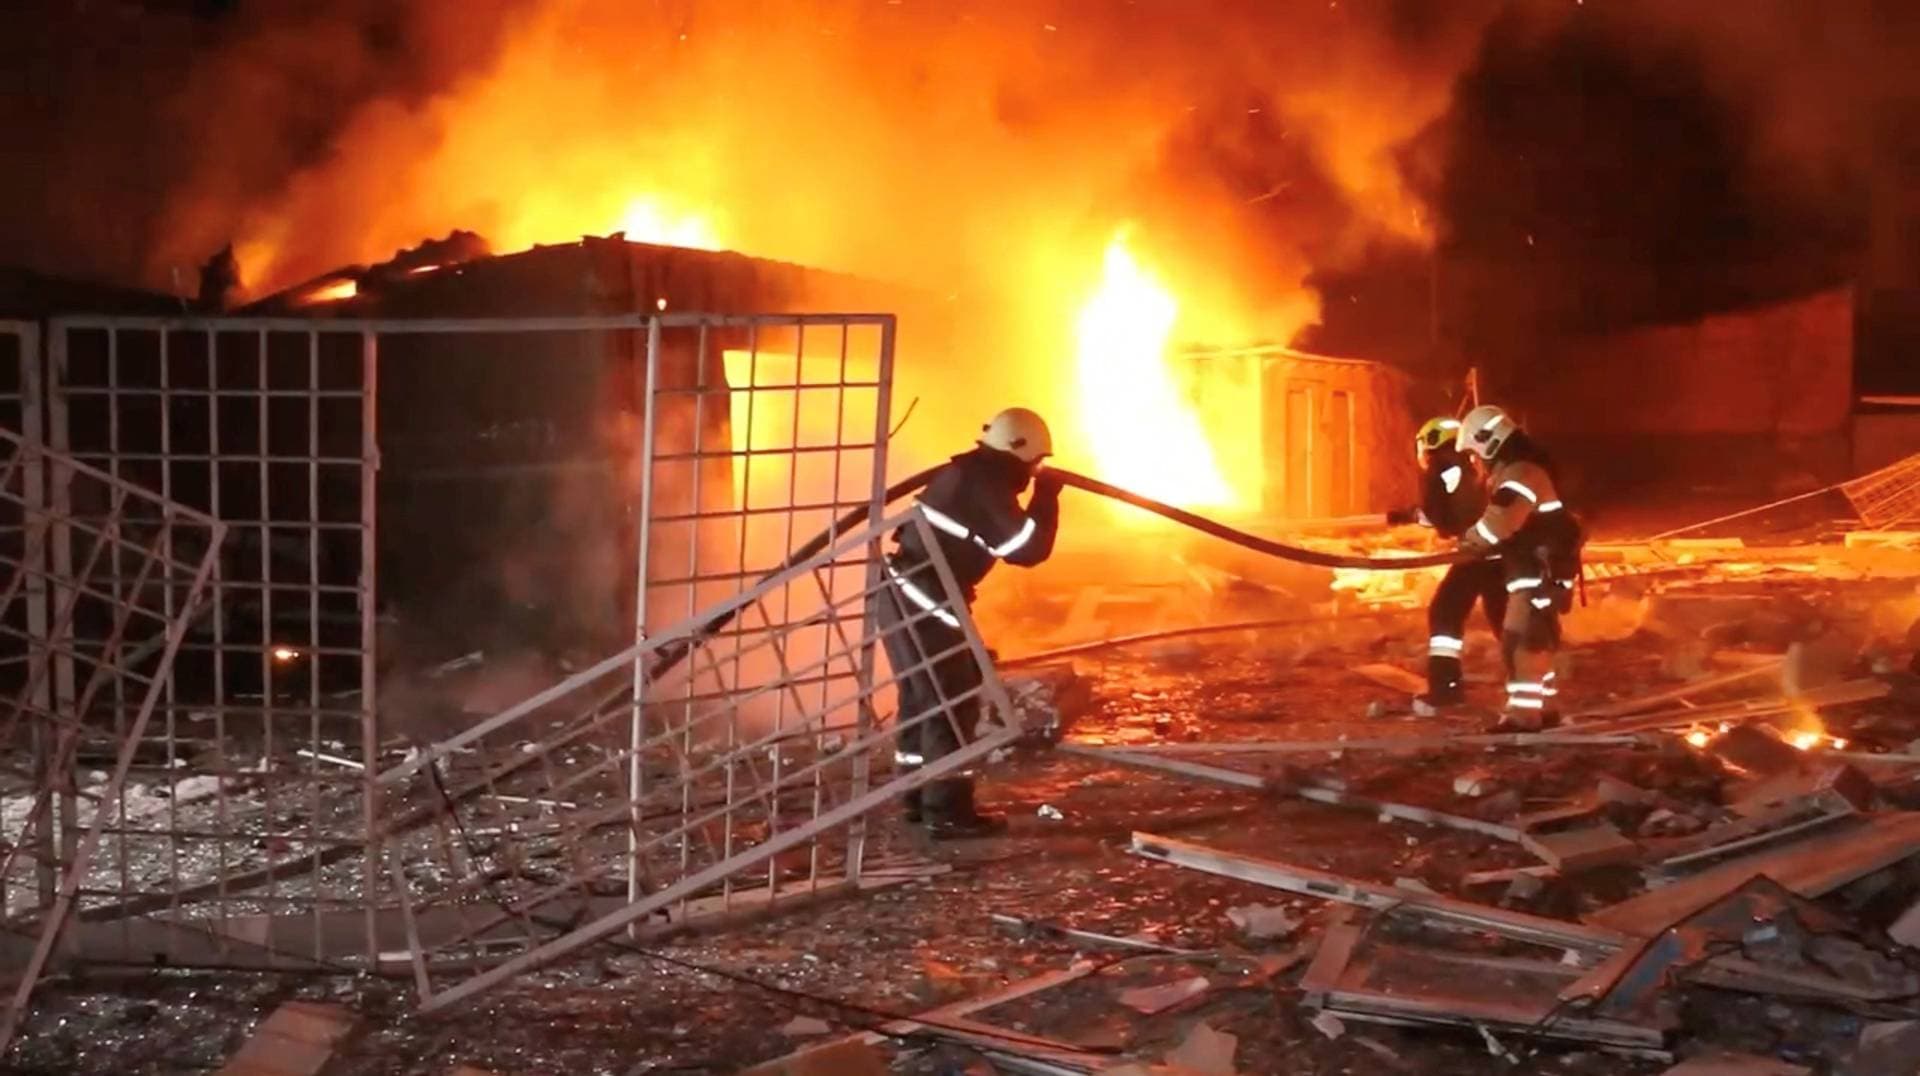 Emergency personnel work to put out a fire following a drone attack in Kharkiv